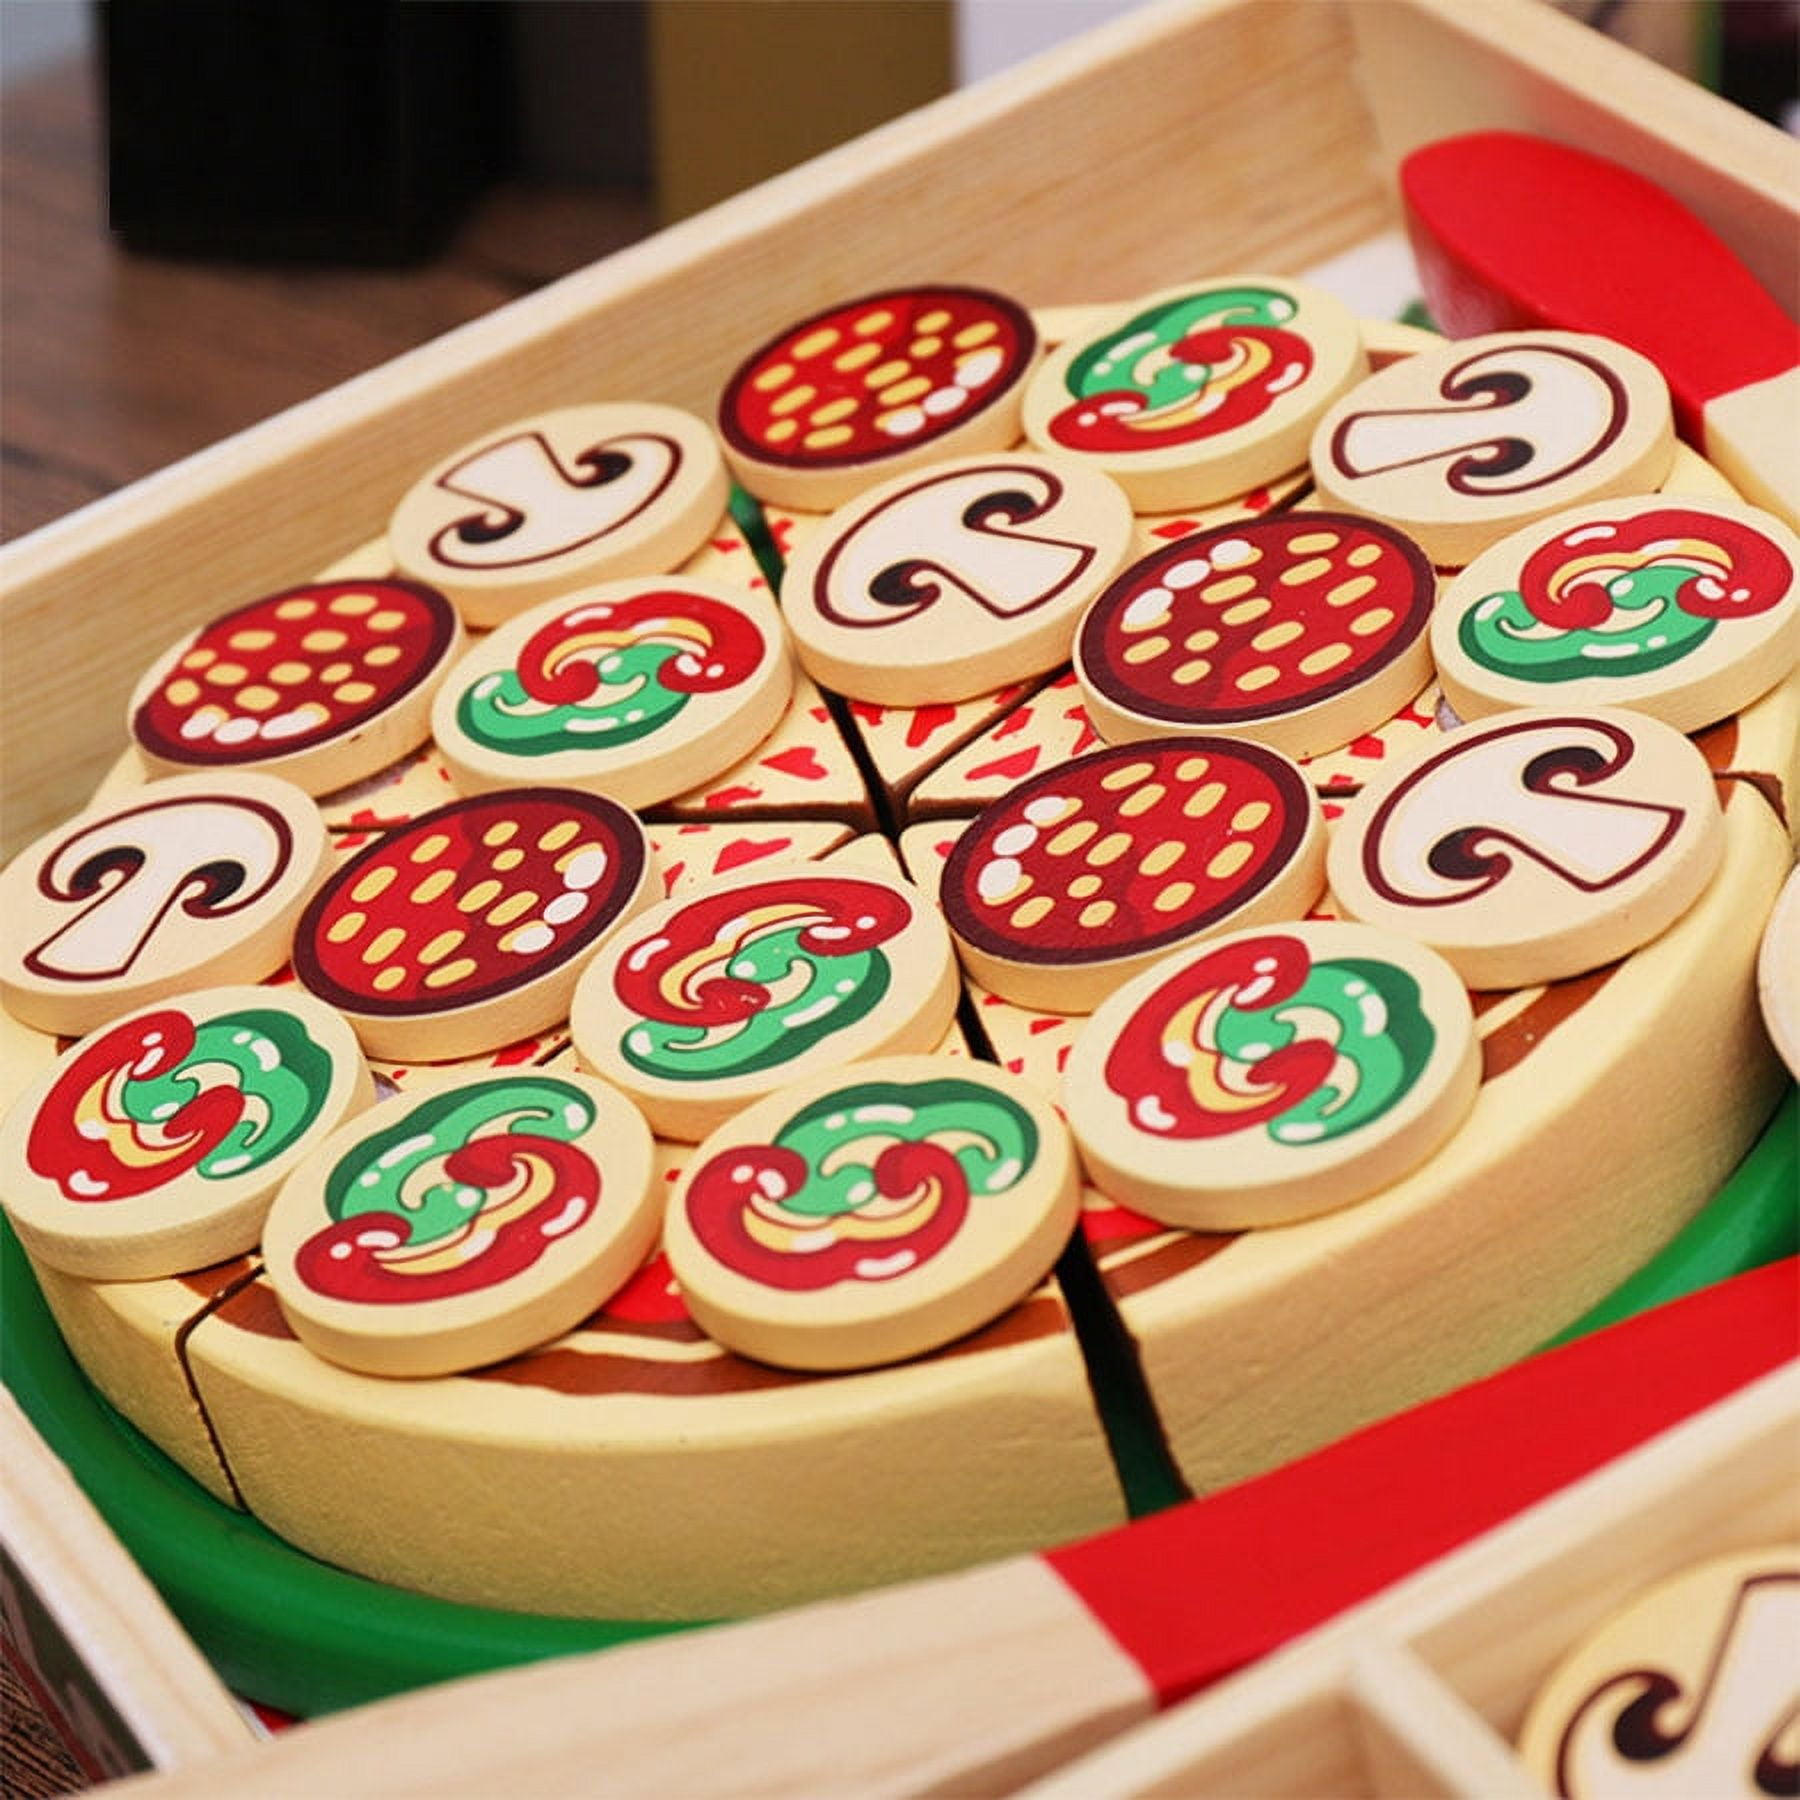 Wooden Pizza Toy Pizza Play Food Set Kids Pizza Set on Luulla